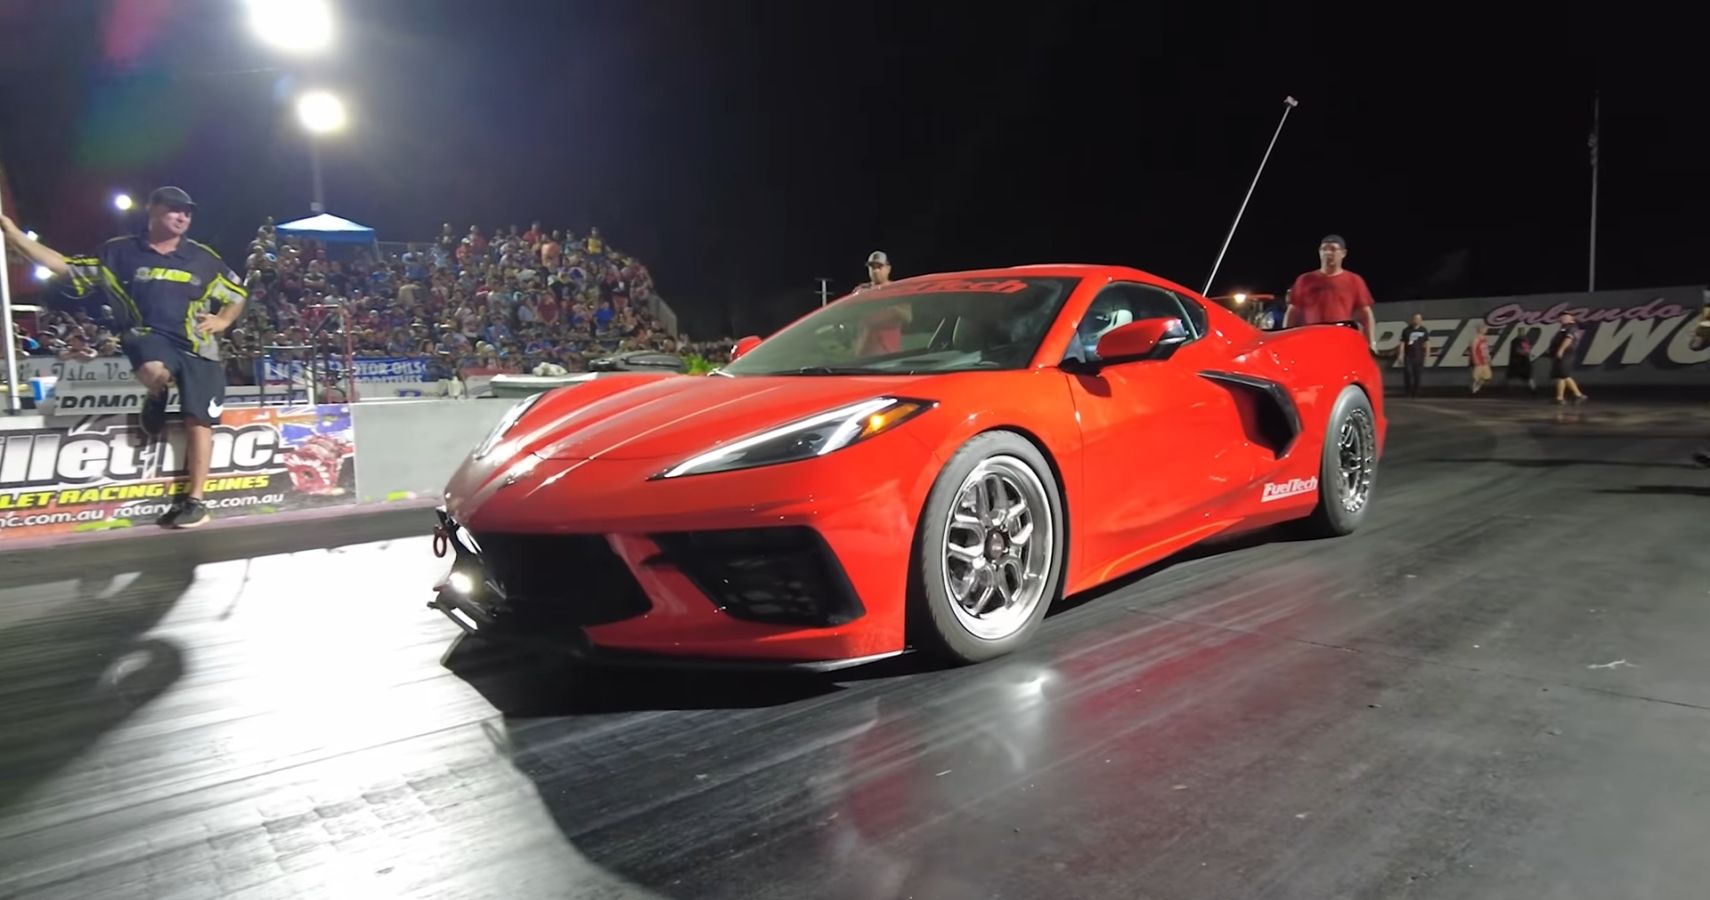 There’s Now An 8Second Quarter Mile Running C8 Corvette